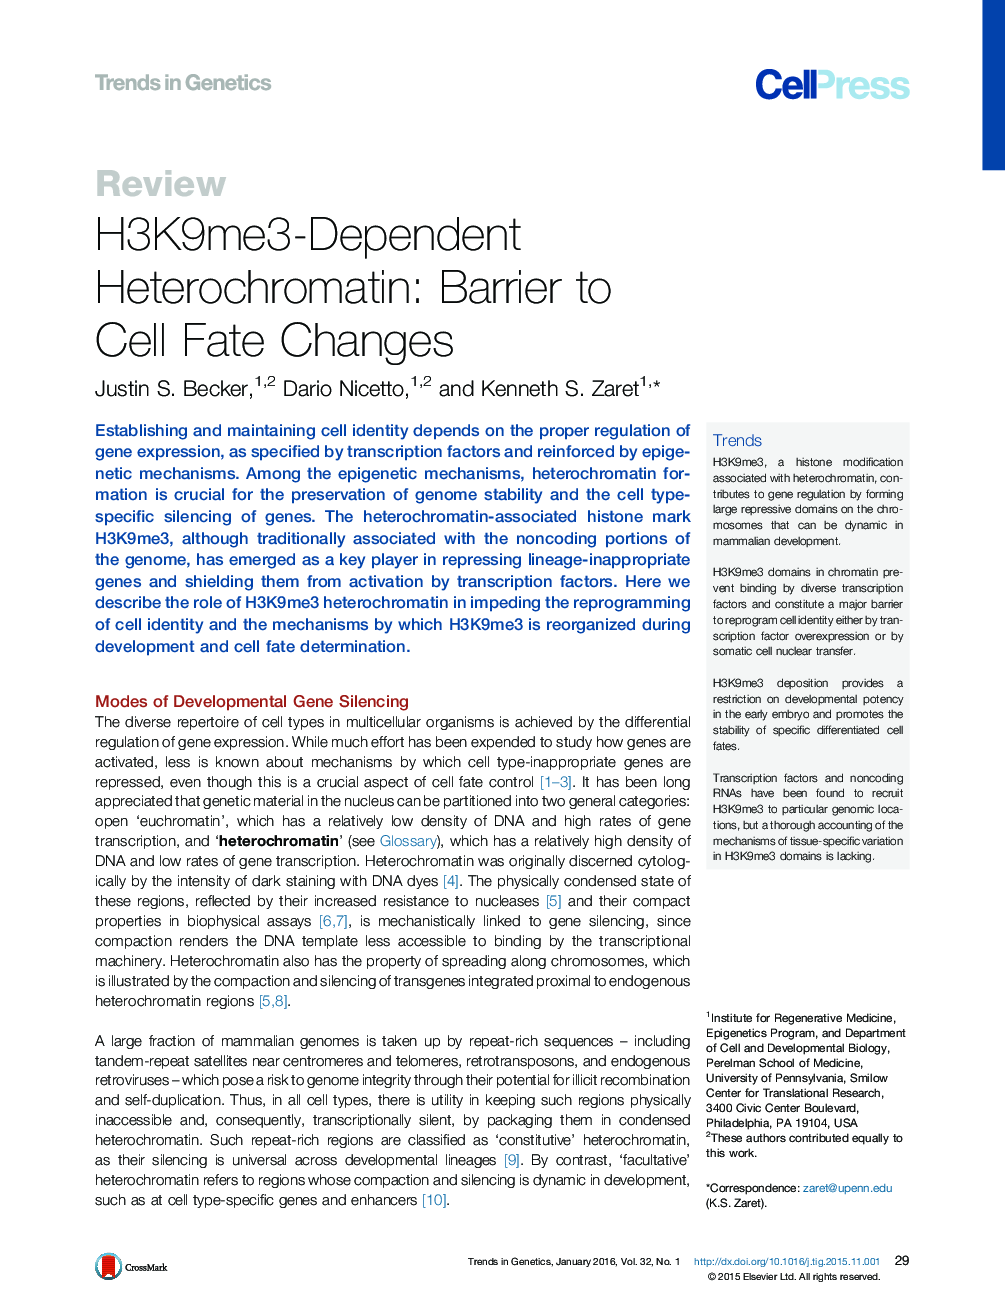 H3K9me3-Dependent Heterochromatin: Barrier to Cell Fate Changes